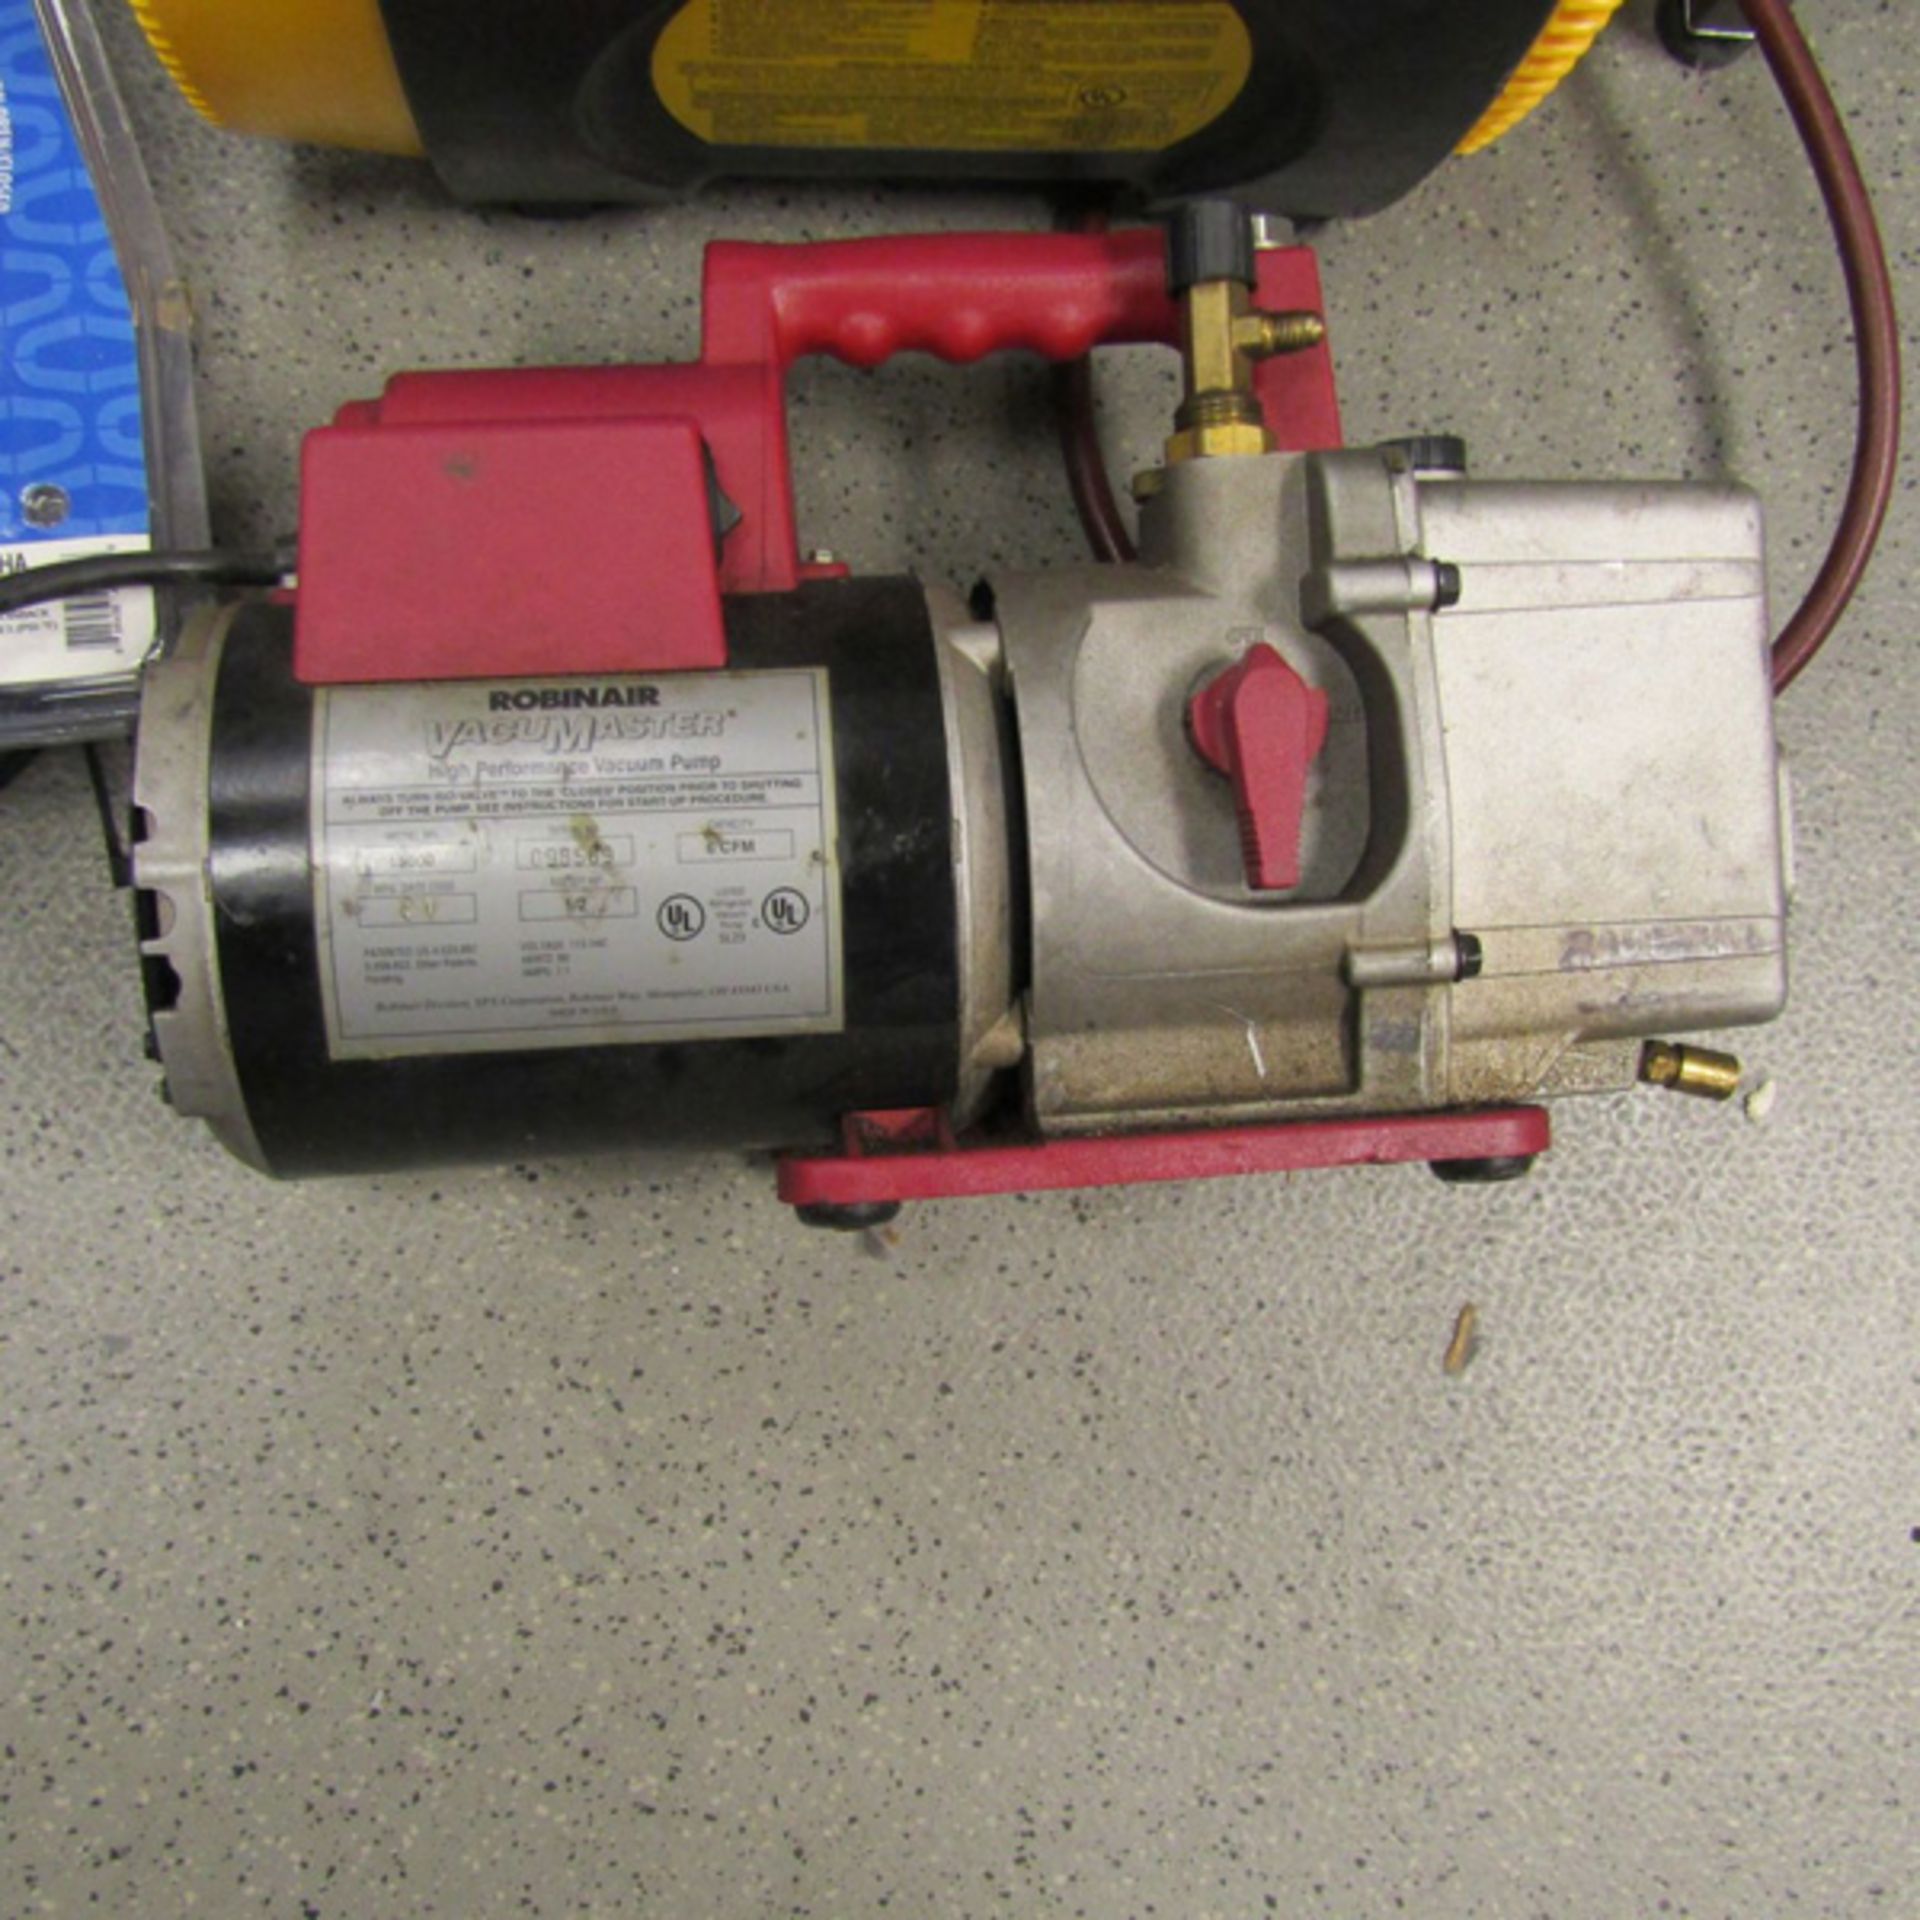 A/C Diagnosis Equipment to Include (1) Robinair Vacumaster Model 15600 High Performance Vacuum Pump - Image 3 of 4